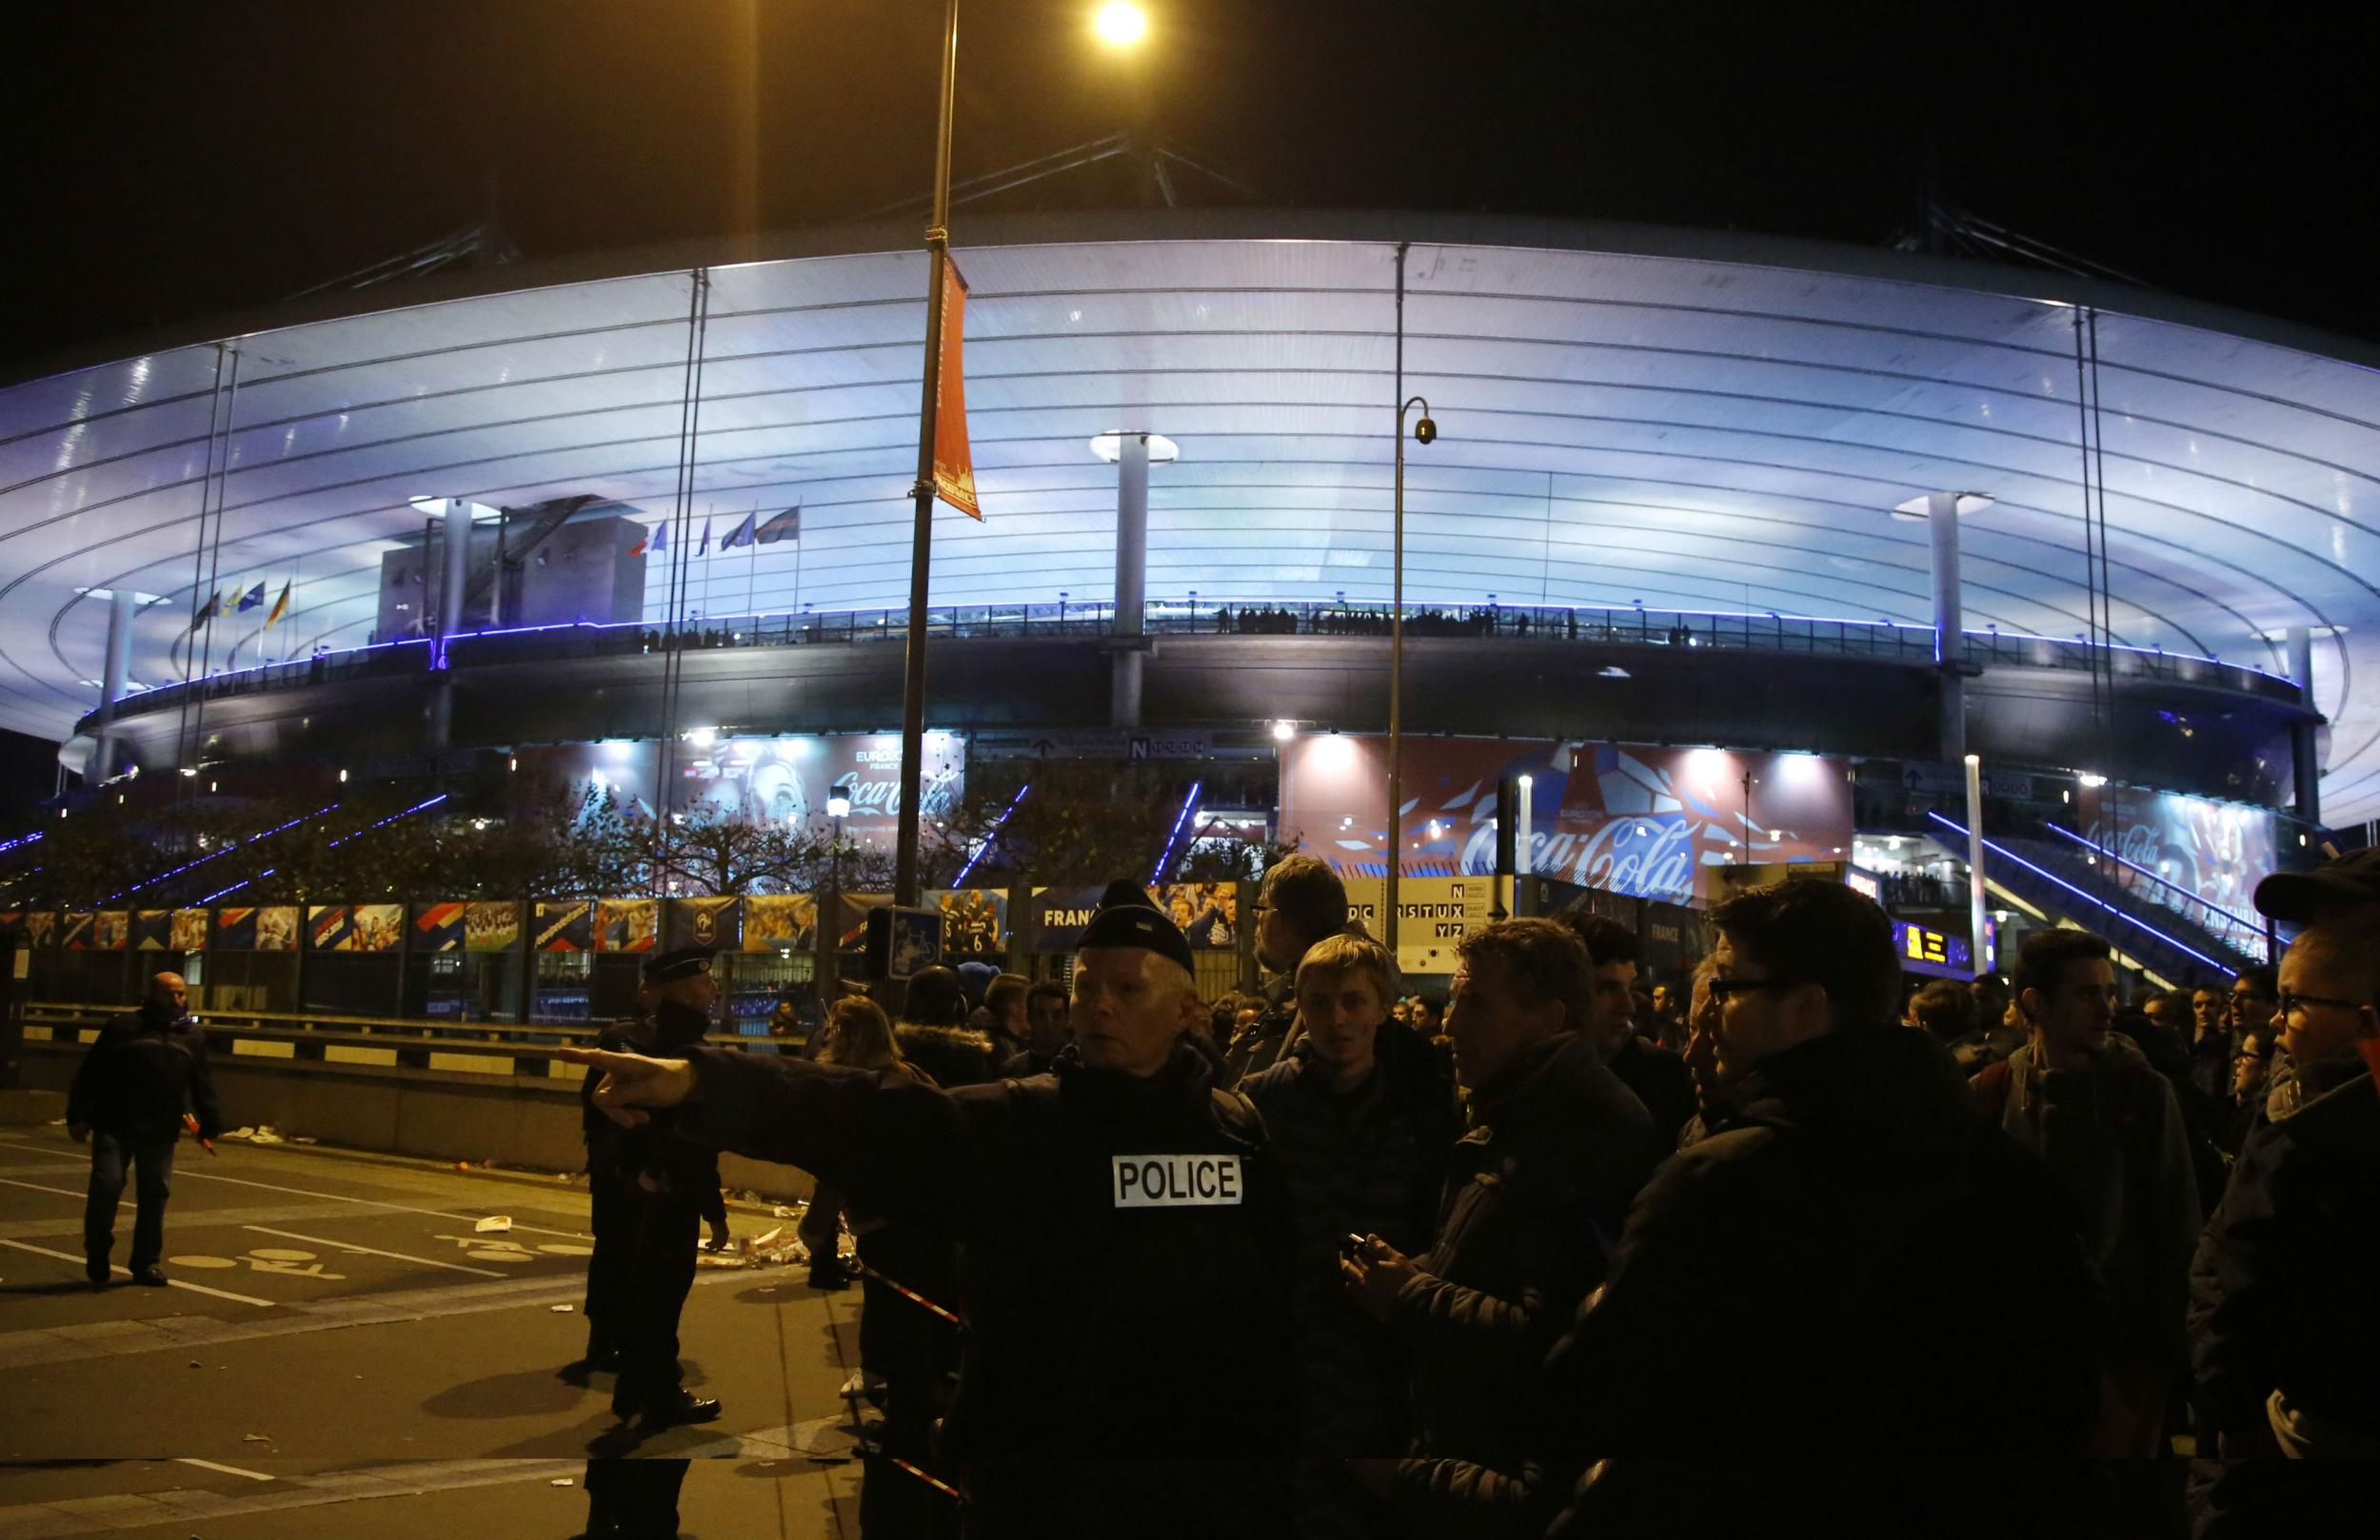 The Stade de France saw scenes of chaos